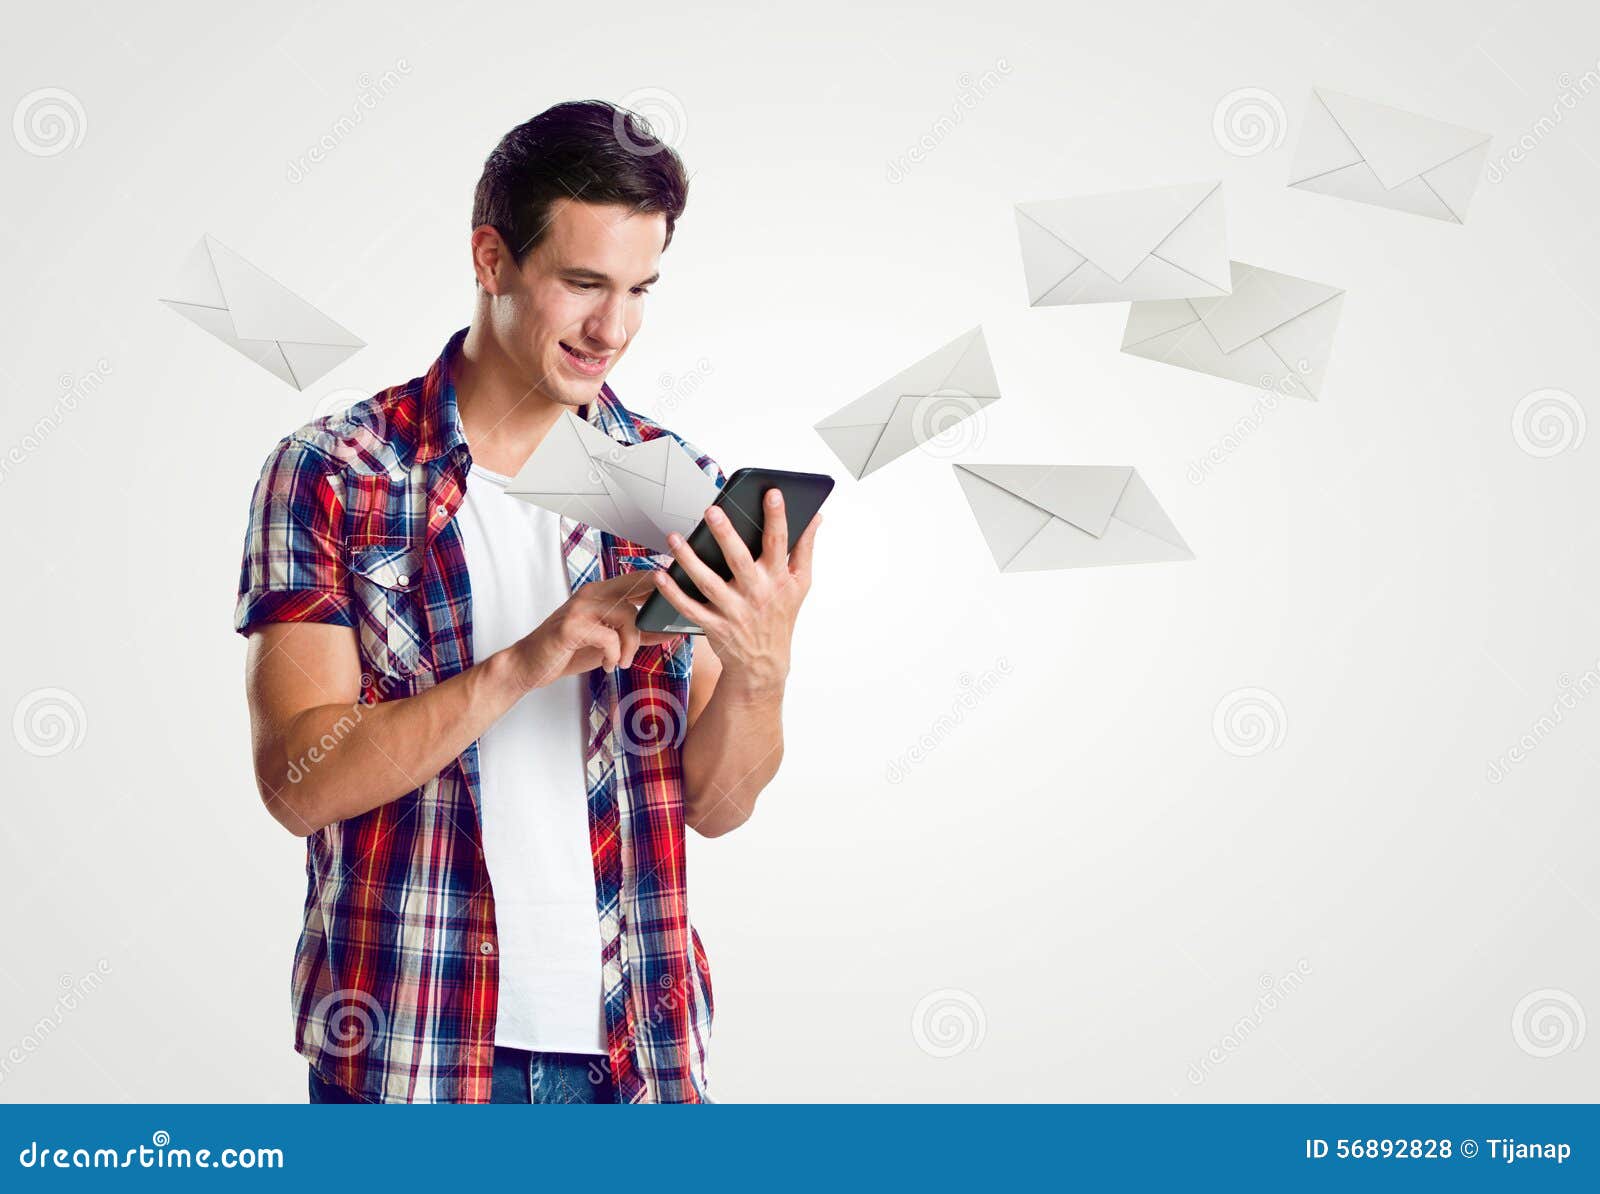 young man receive mail over tablet